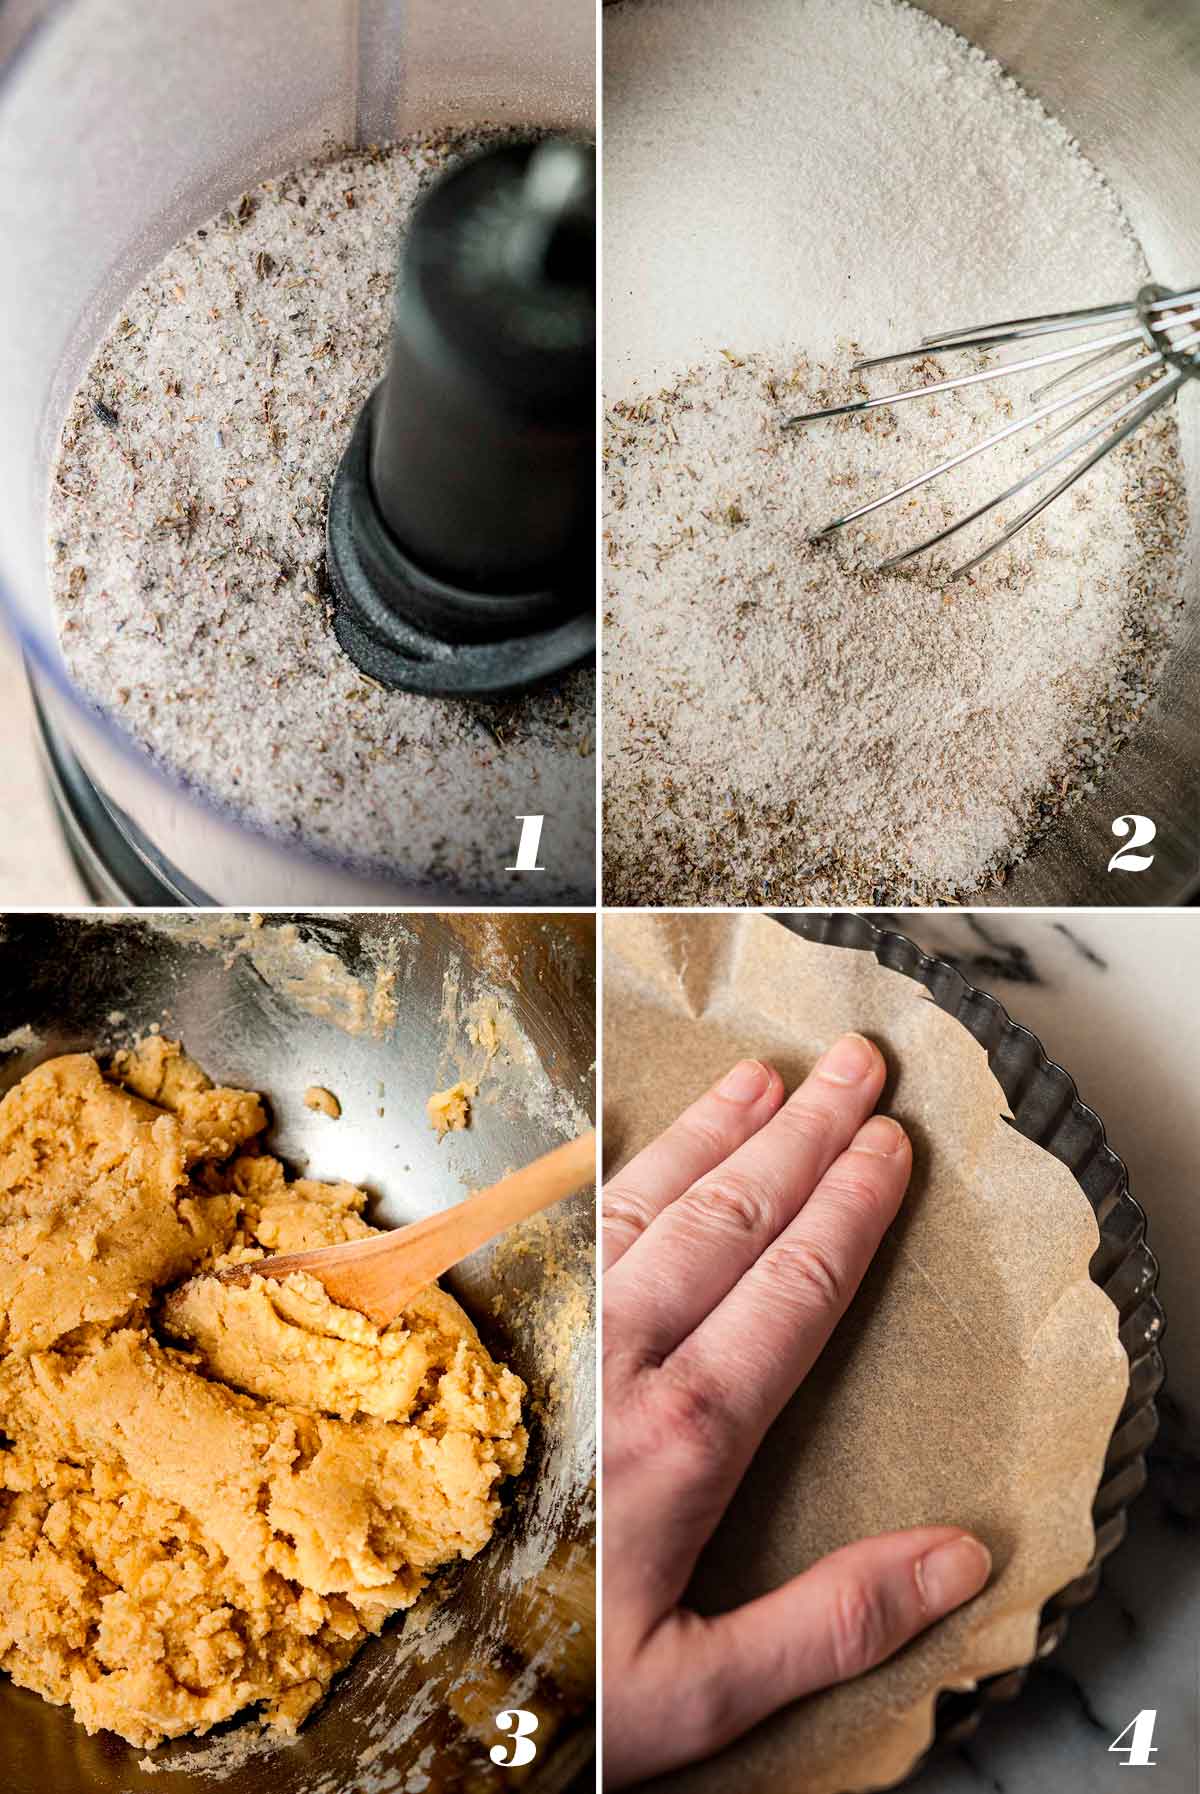 A collage of 4 numbered images showing how to make lavender sugar and dough.